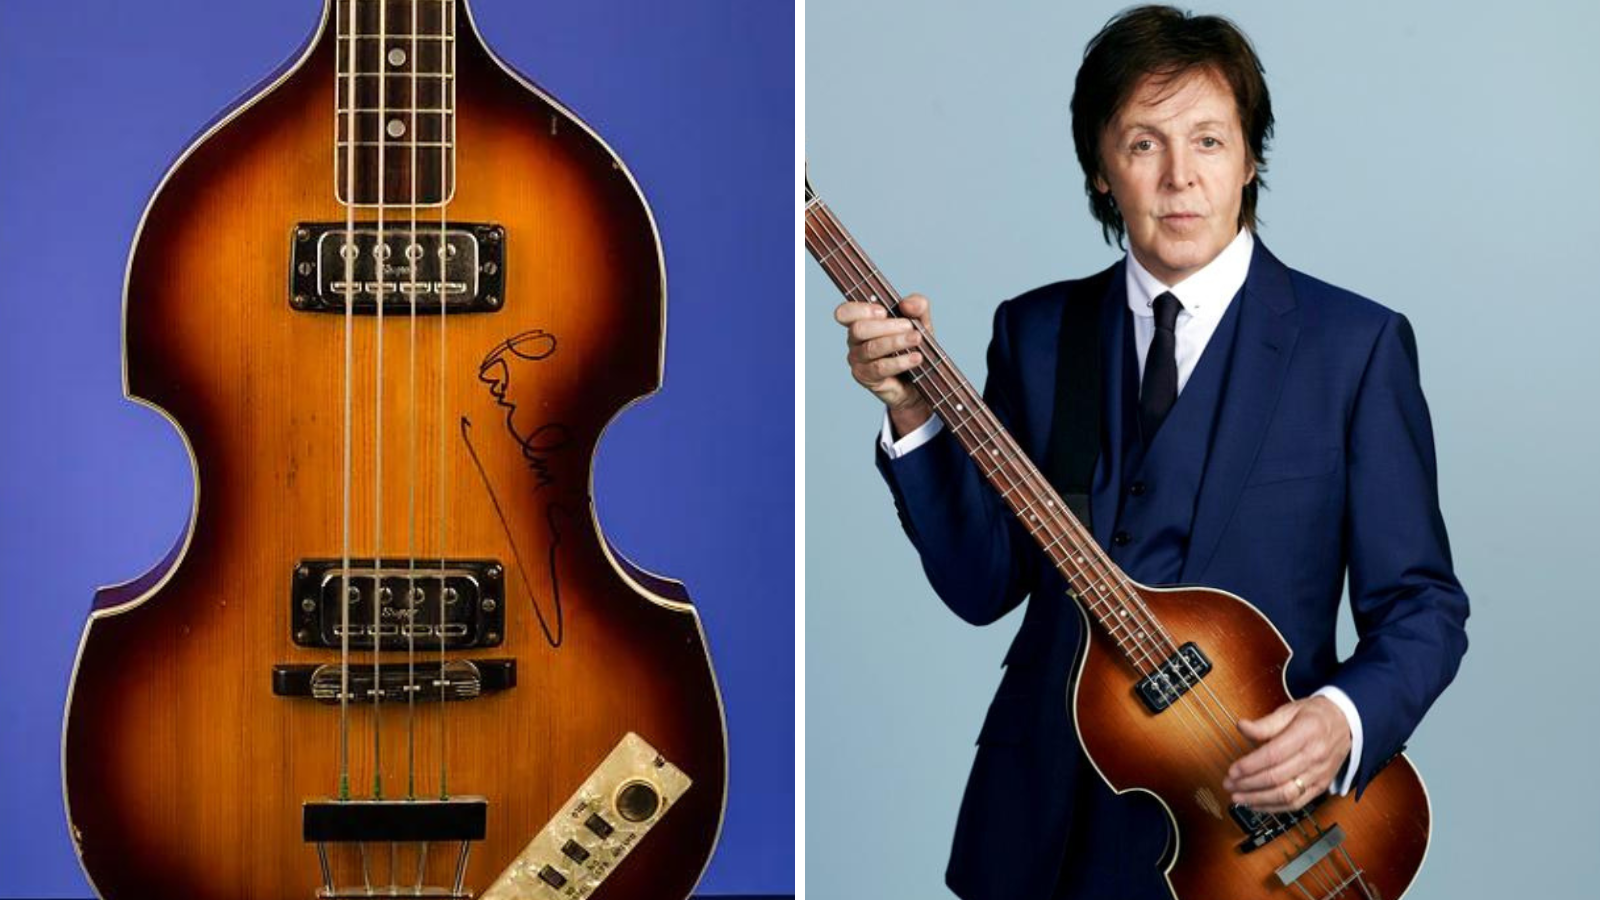 Höfner Bass Signed Paul McCartney Is Being Sold Online, This Is Price | News @ Ultimate-Guitar.Com